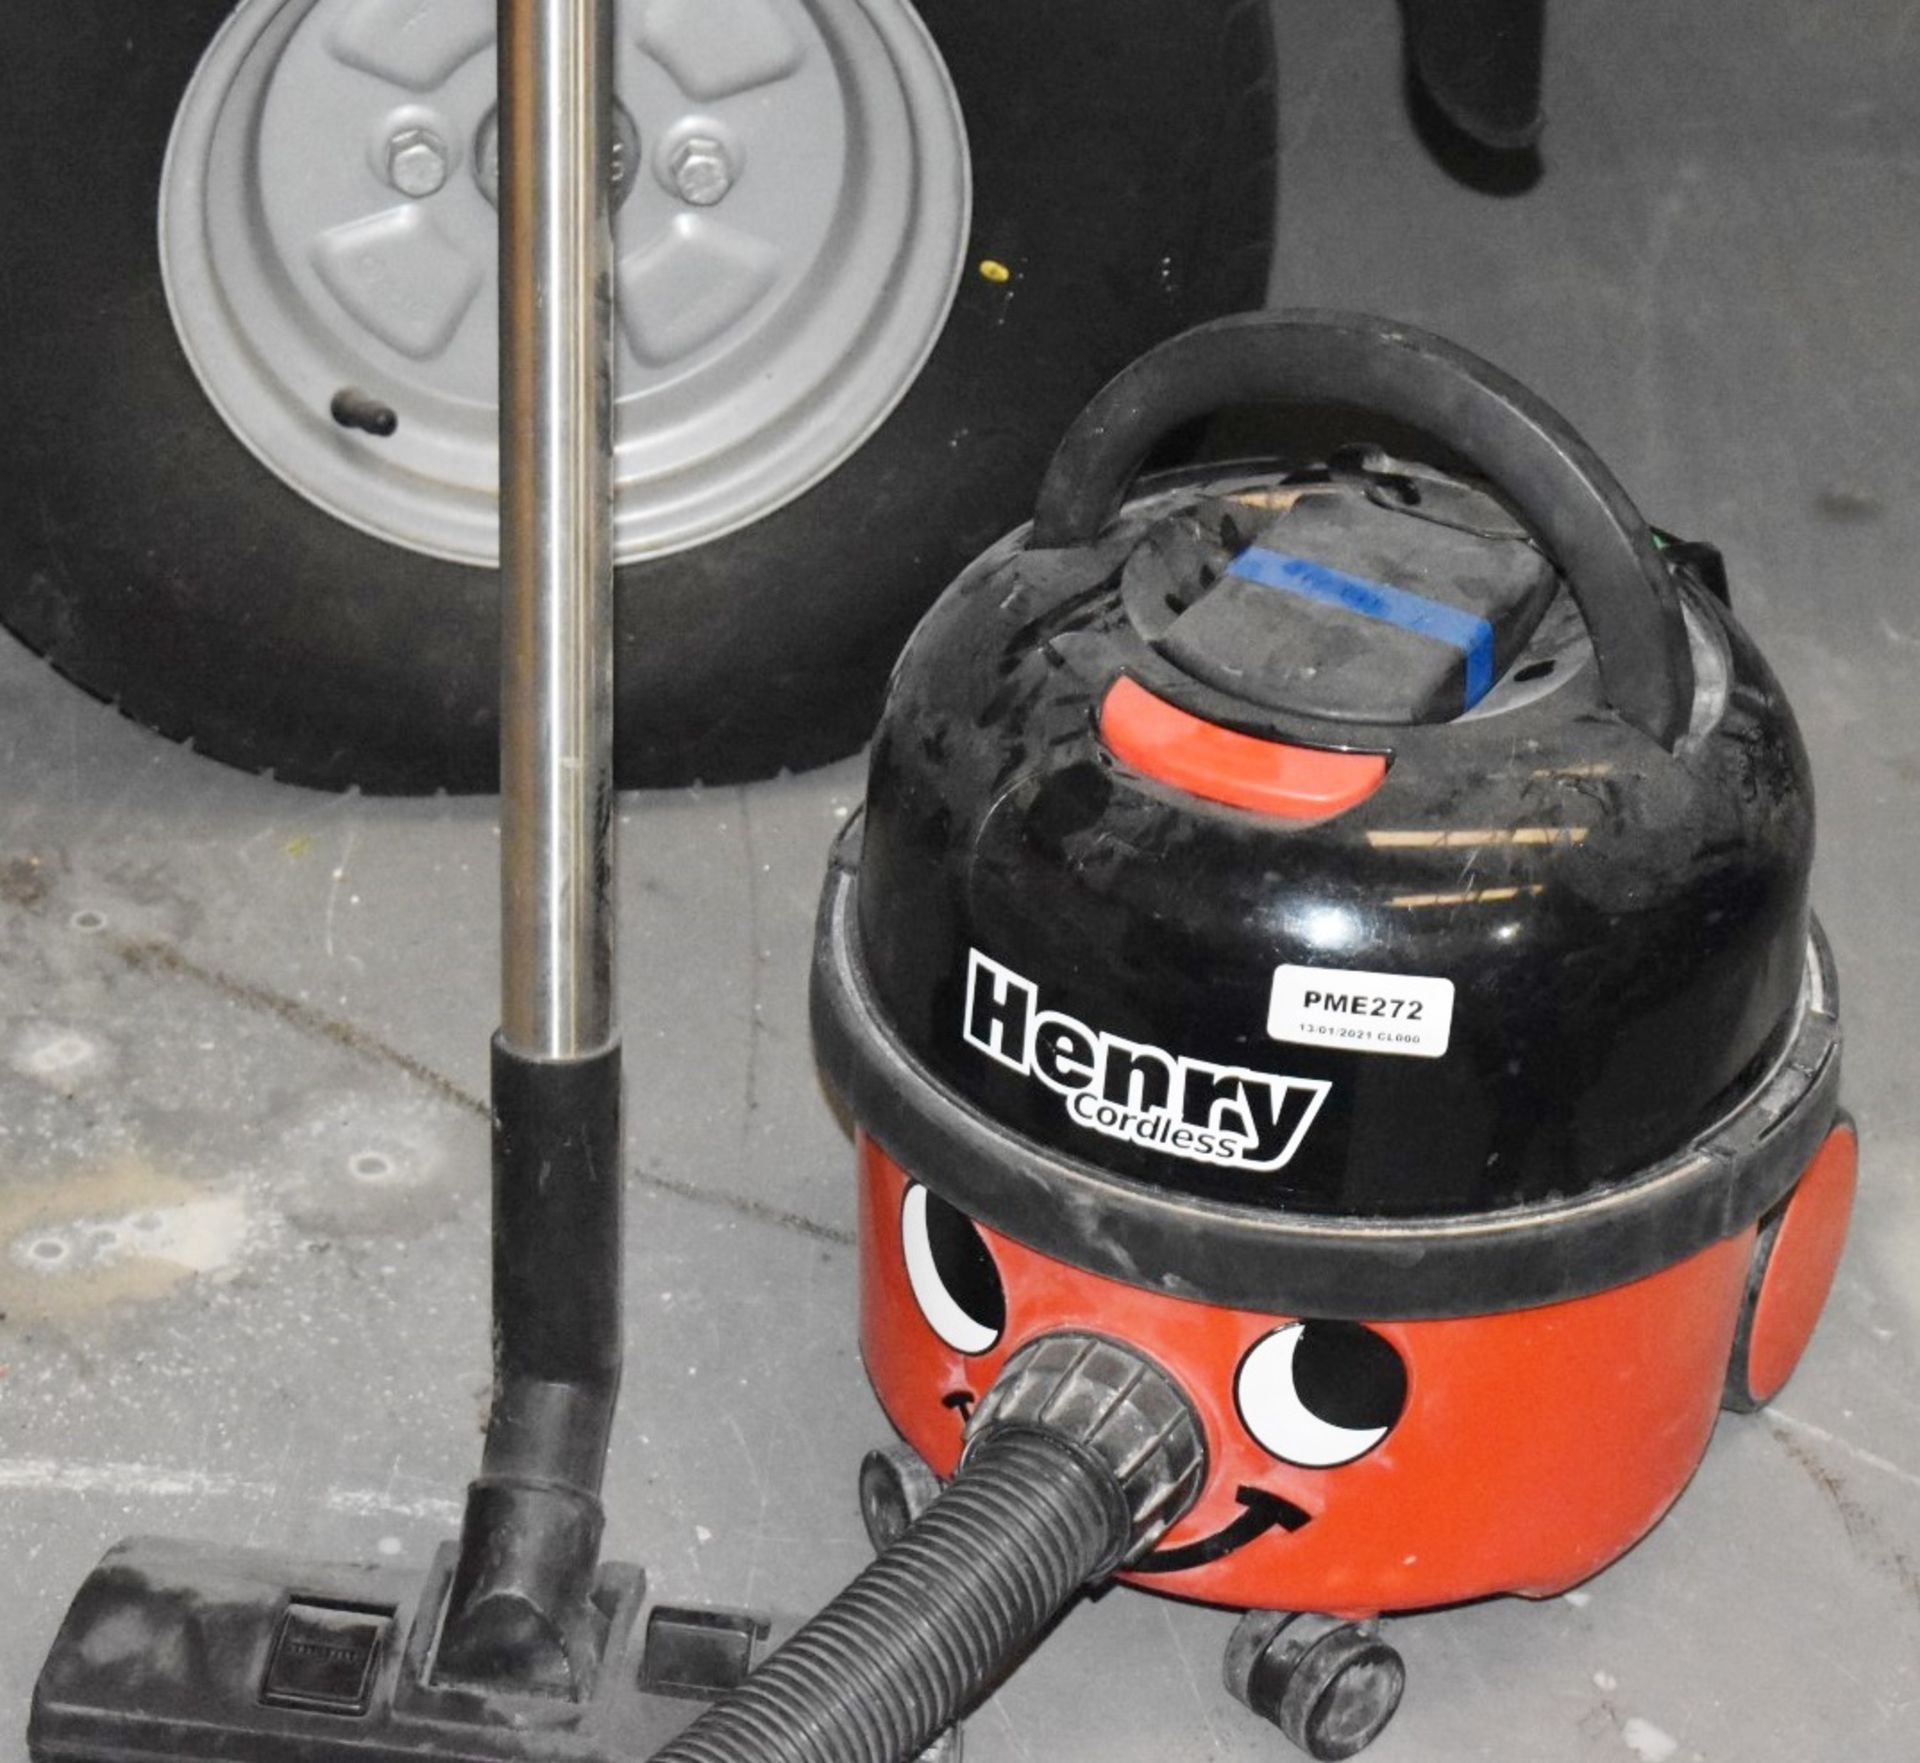 1 x Numatic Henry Hoover Cordless With Two Batteries and Charger PME272